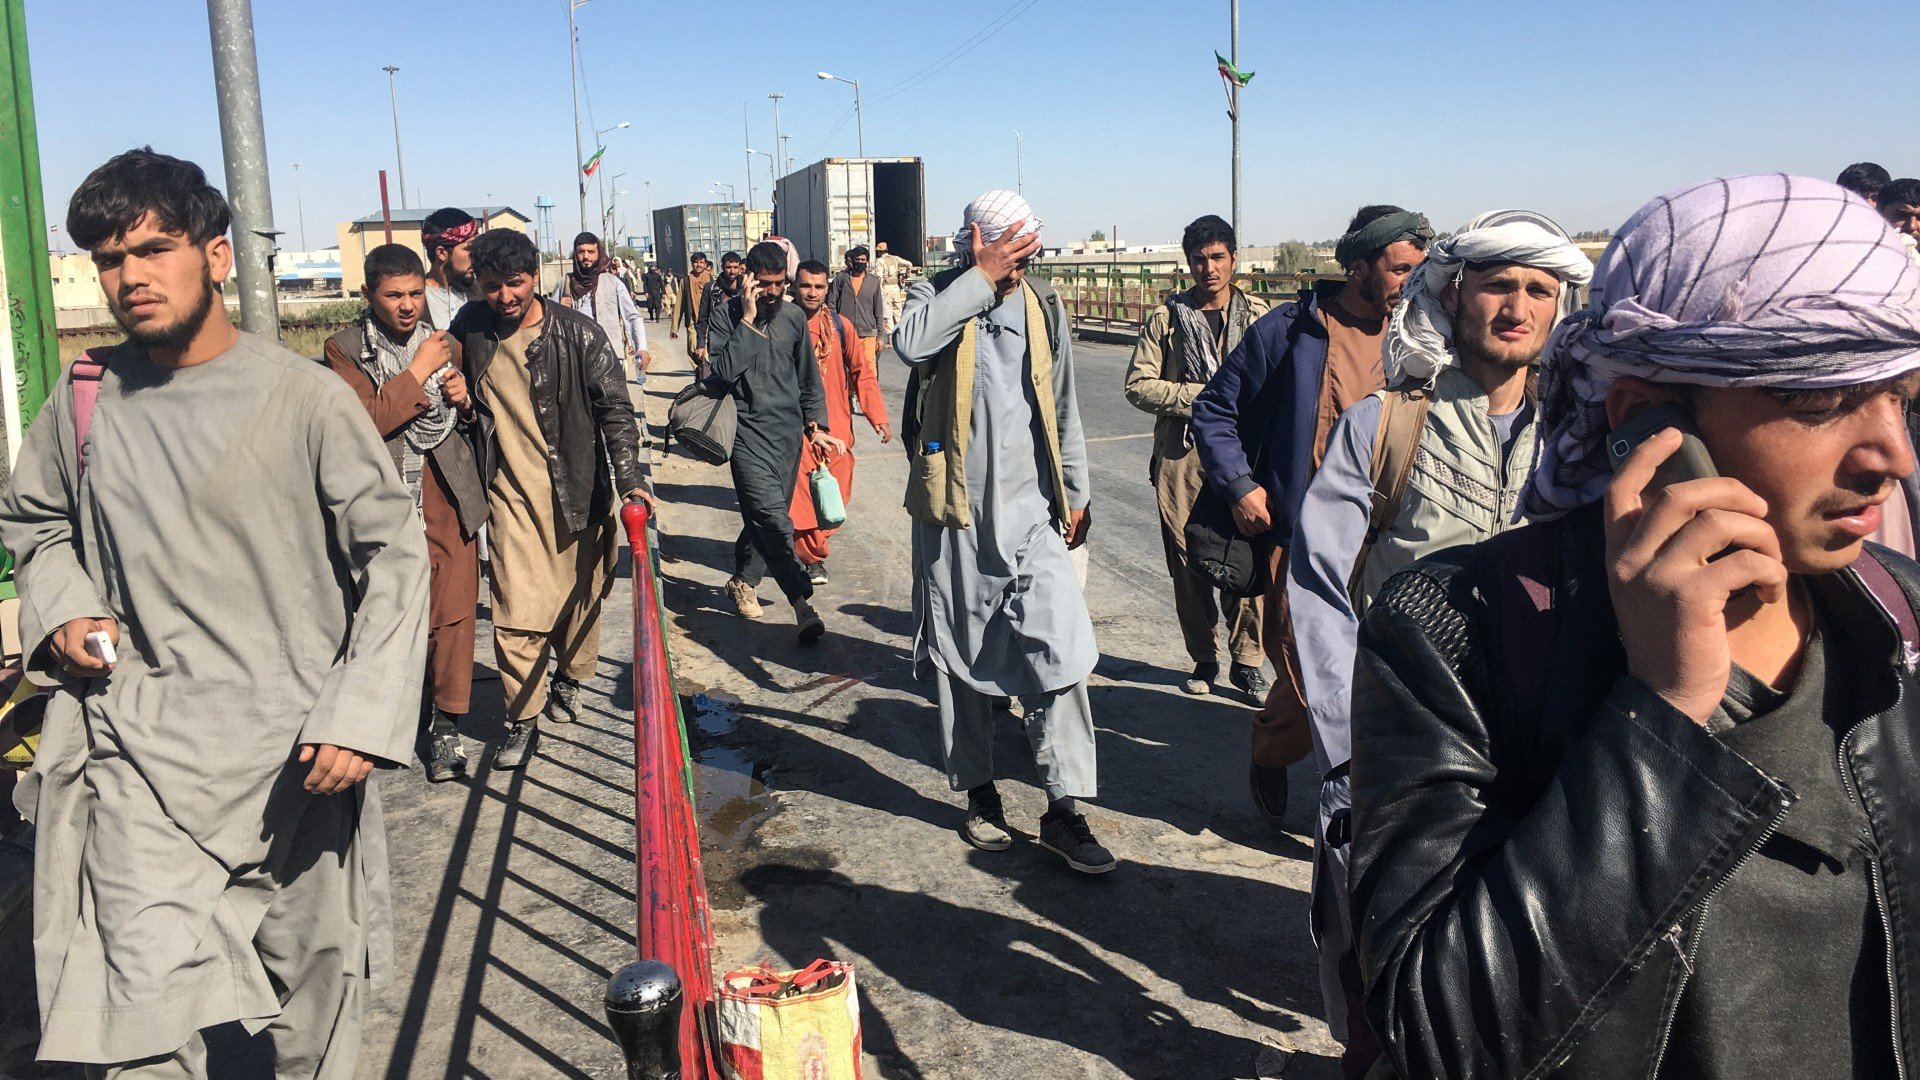 October 5, 2021, Afghan men try to leave the country walking towards the Afghan-Iran border in Zaranj in the southwestern province of Nimroz.